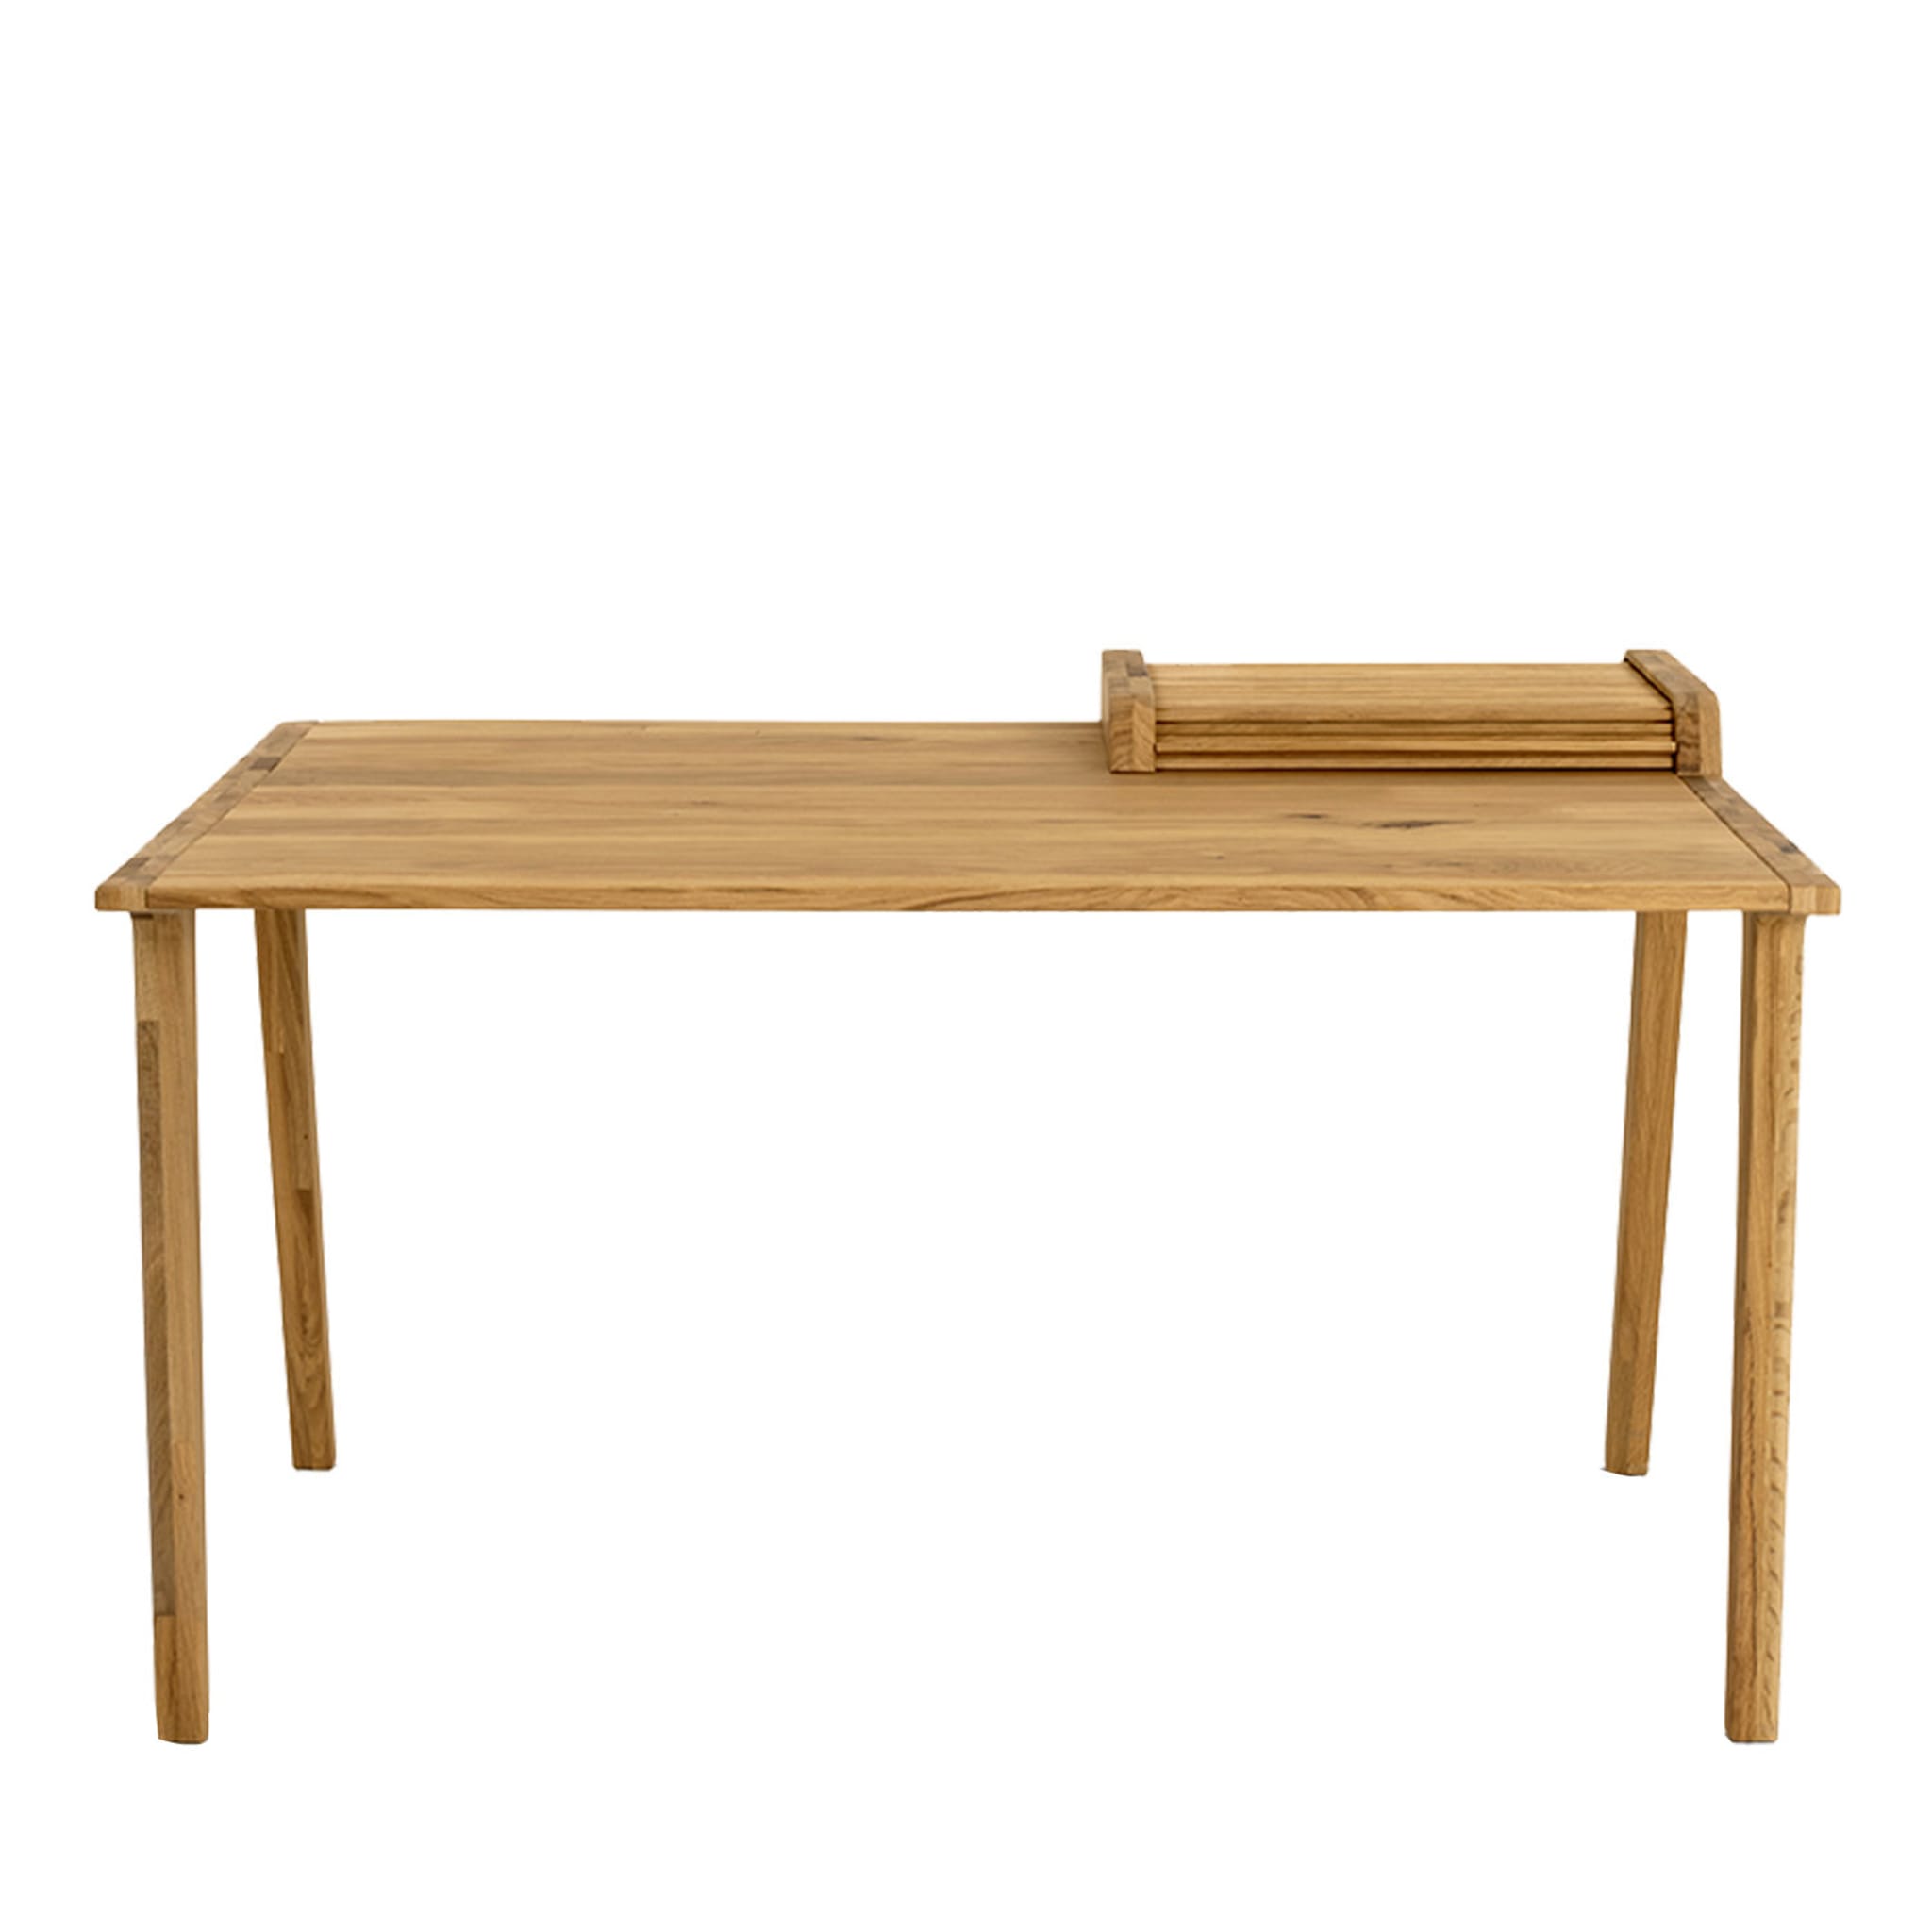 Tapparelle Desk by Emmanuel Gallina - Main view